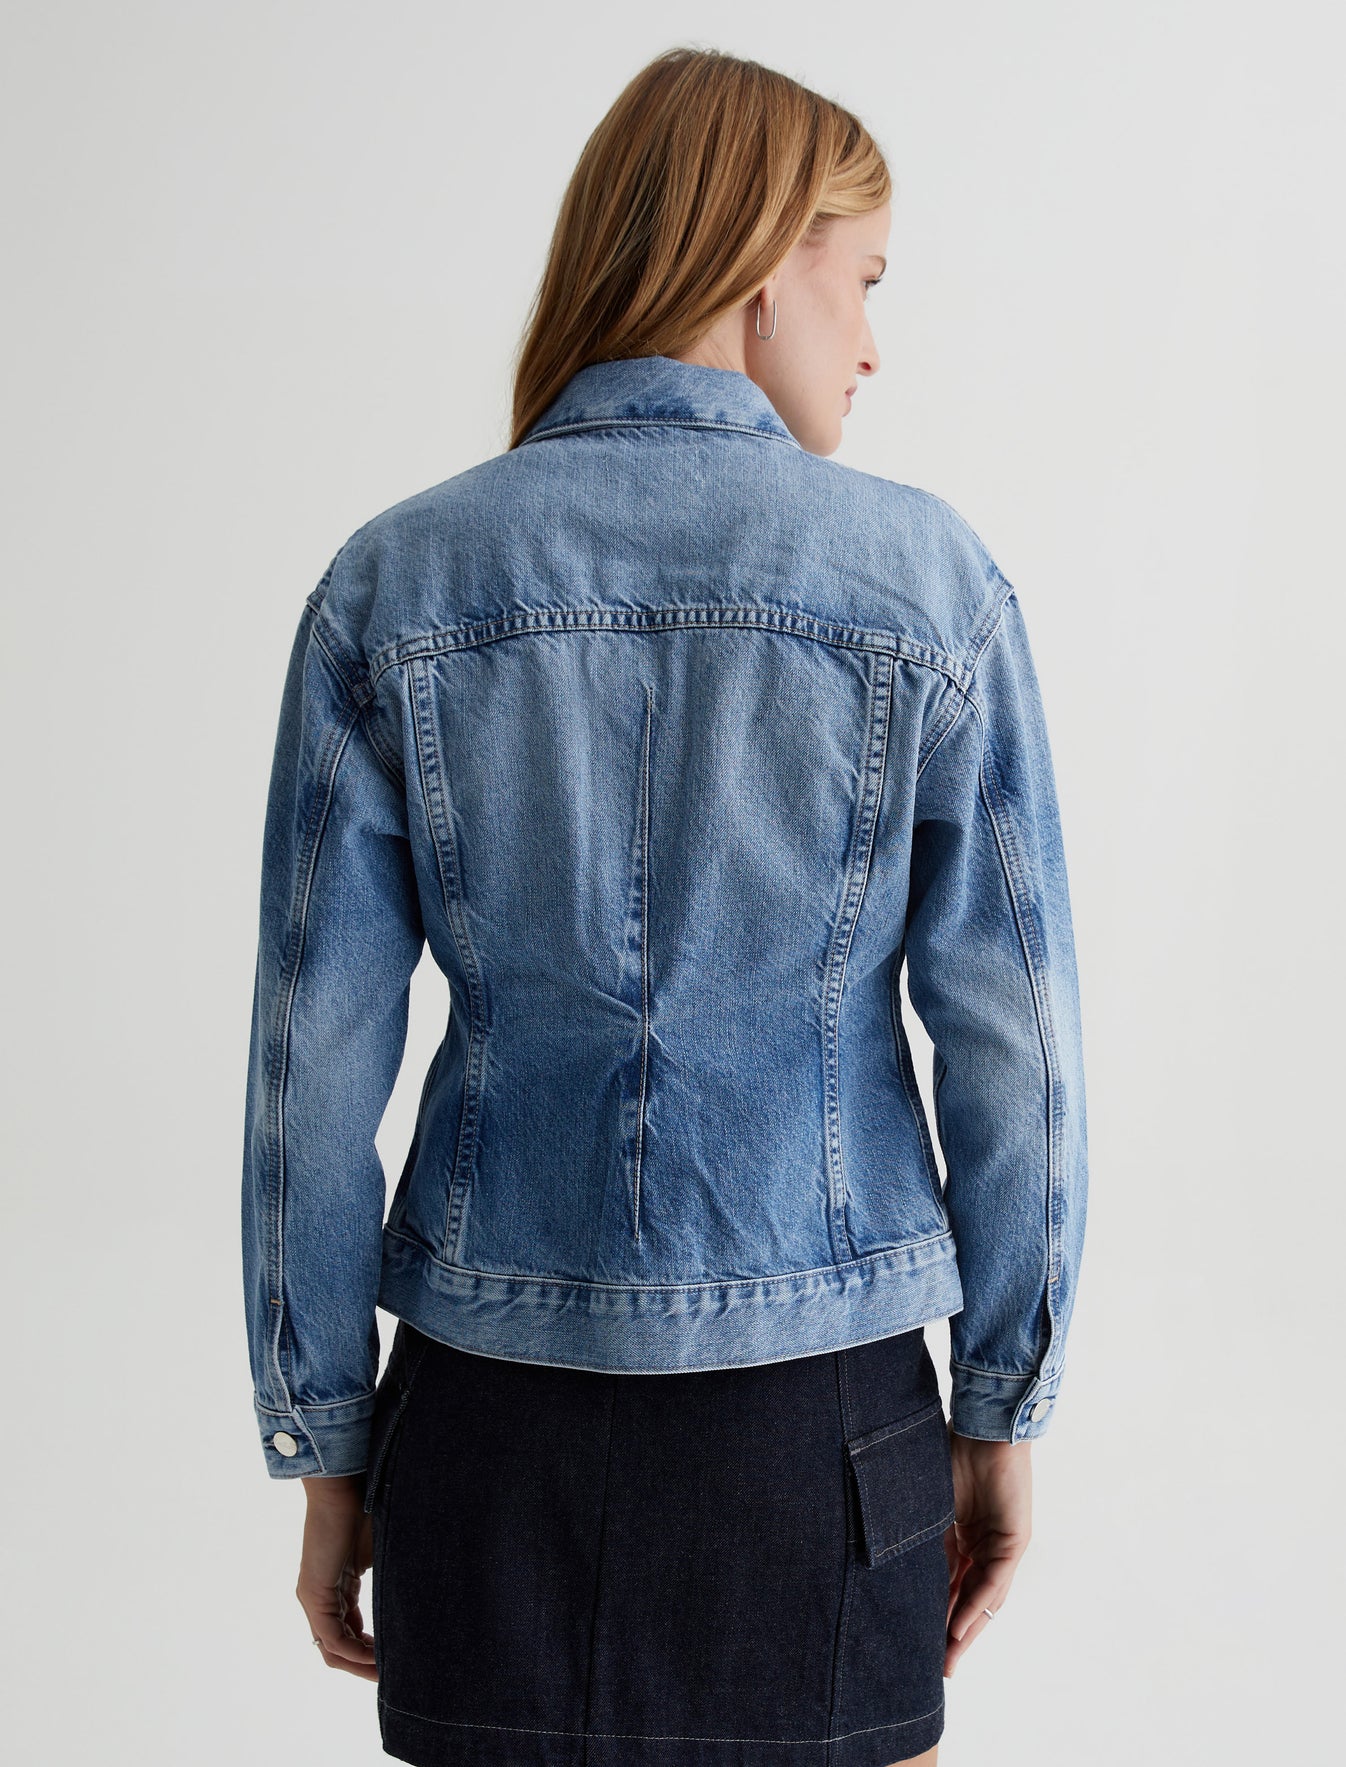 Womens Bell Jacket Crosby at AG Jeans Official Store